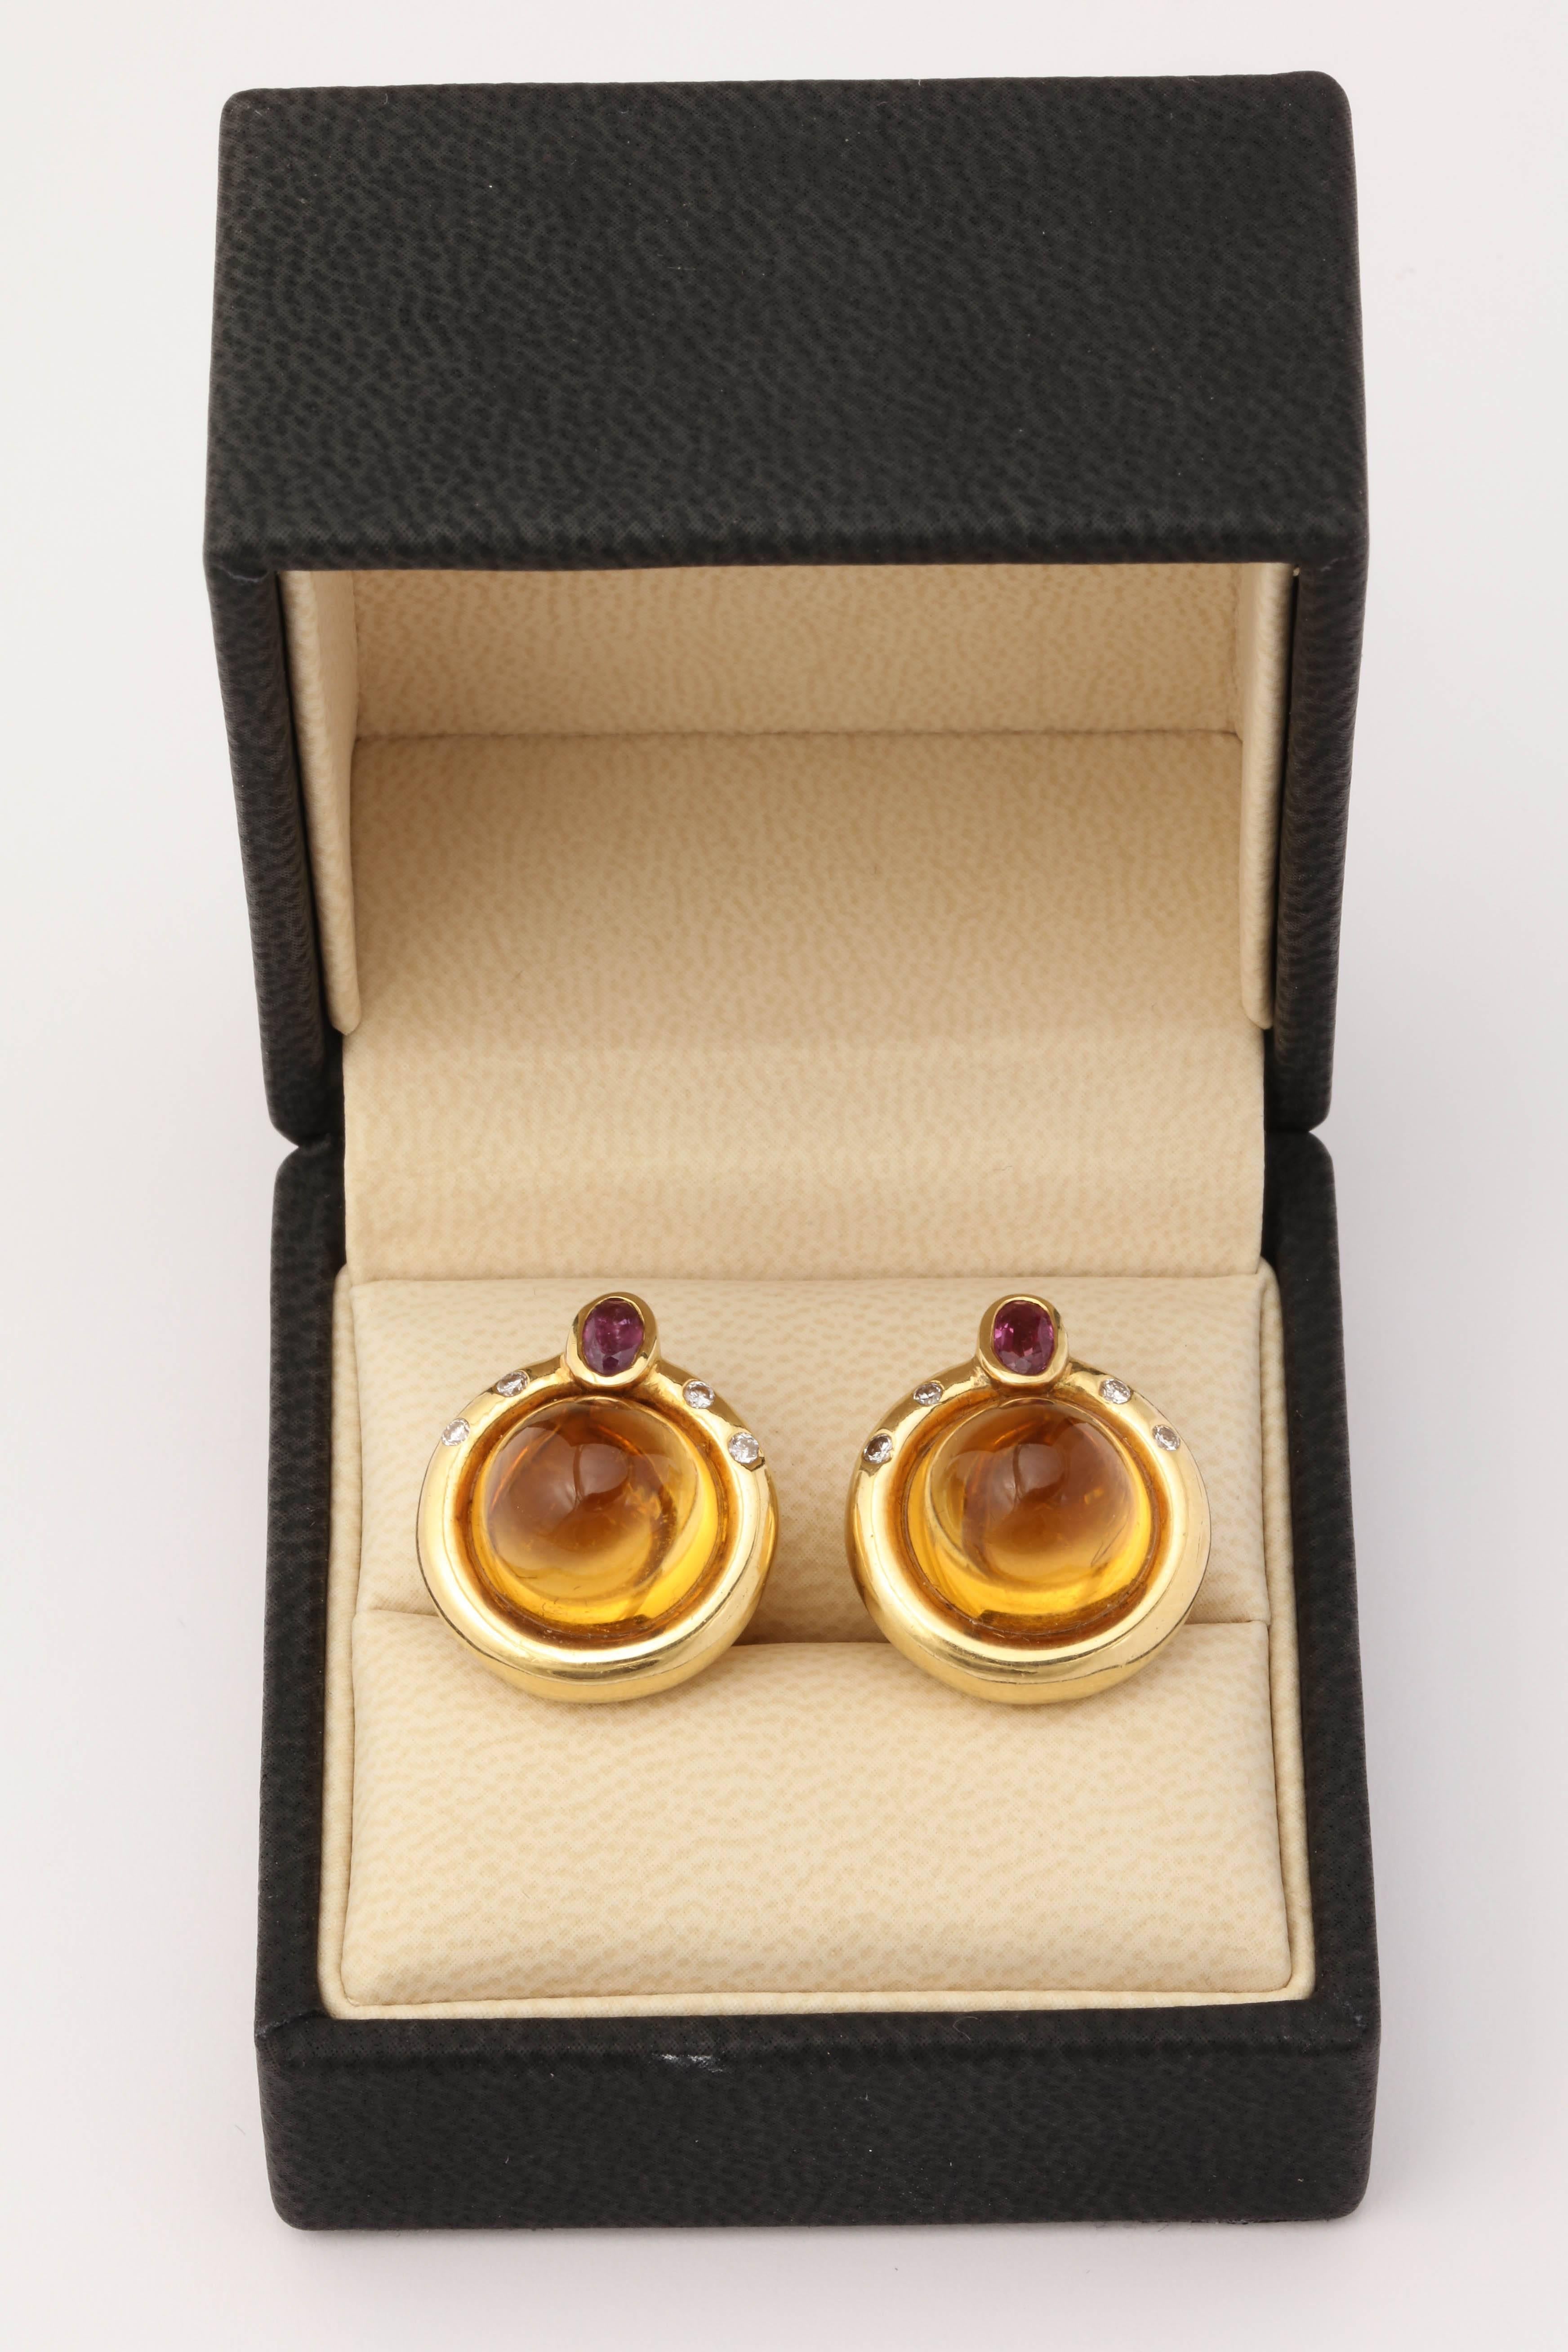 Sugarloaf Cabochon R.Cipullo 1990s Sugar Loaf Cut Citrine Ruby with Diamonds Gold Earrings For Sale